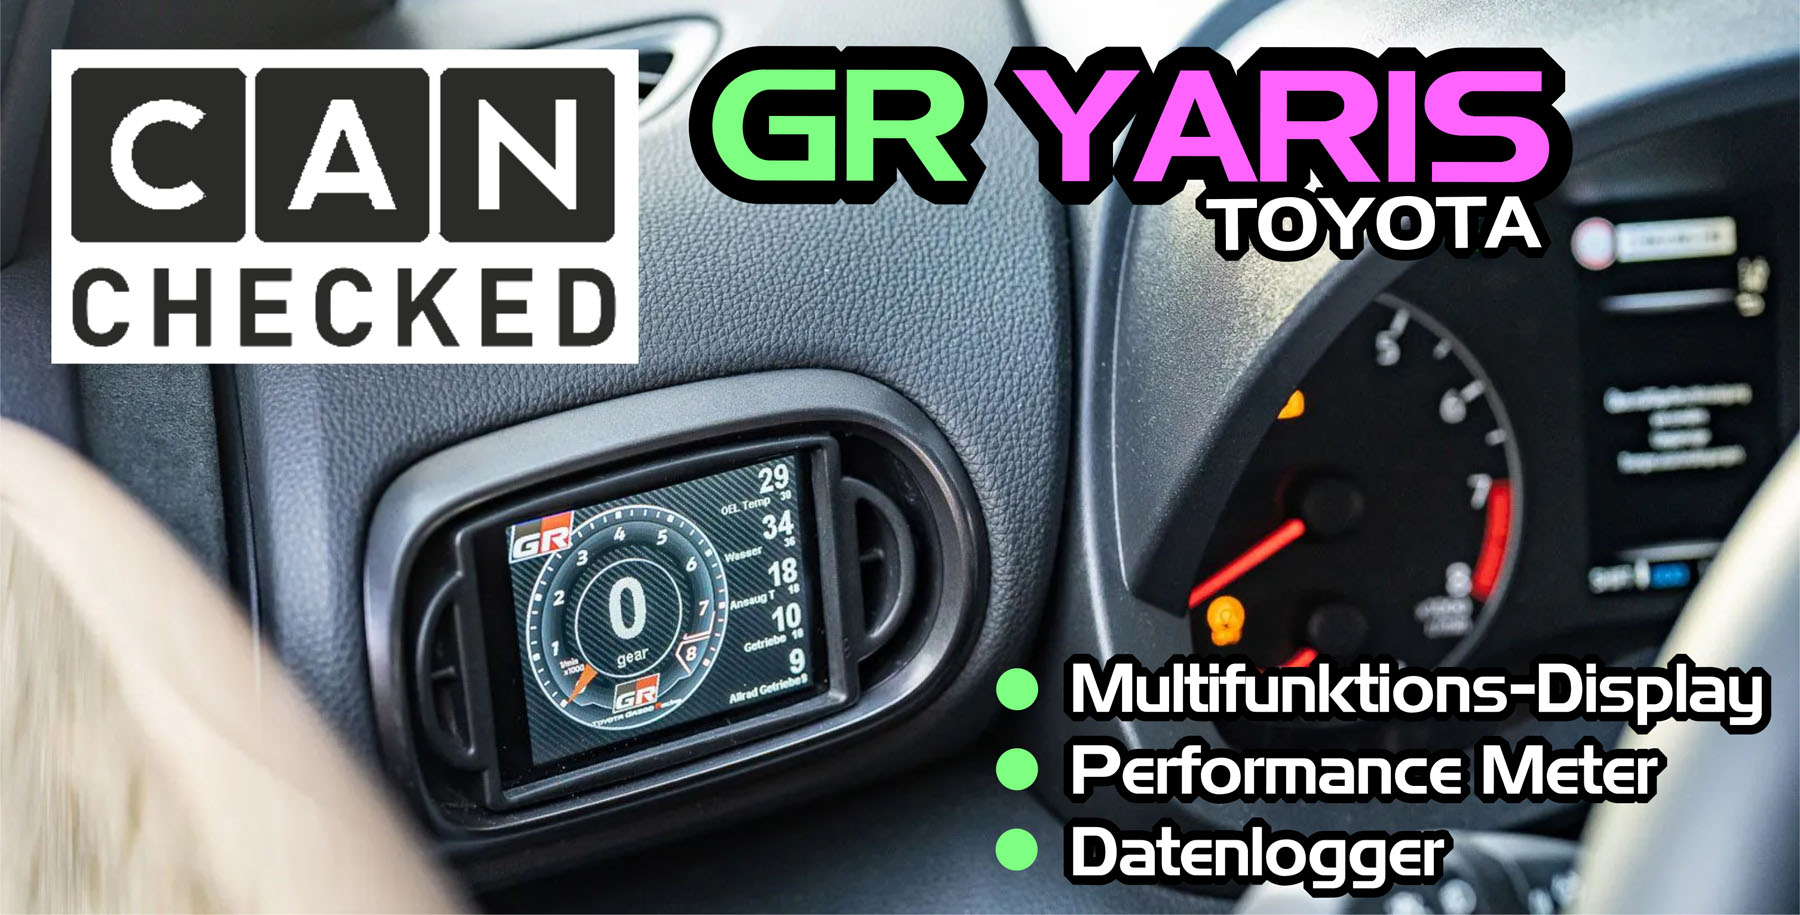 CanChecked Toyota GR Yaris